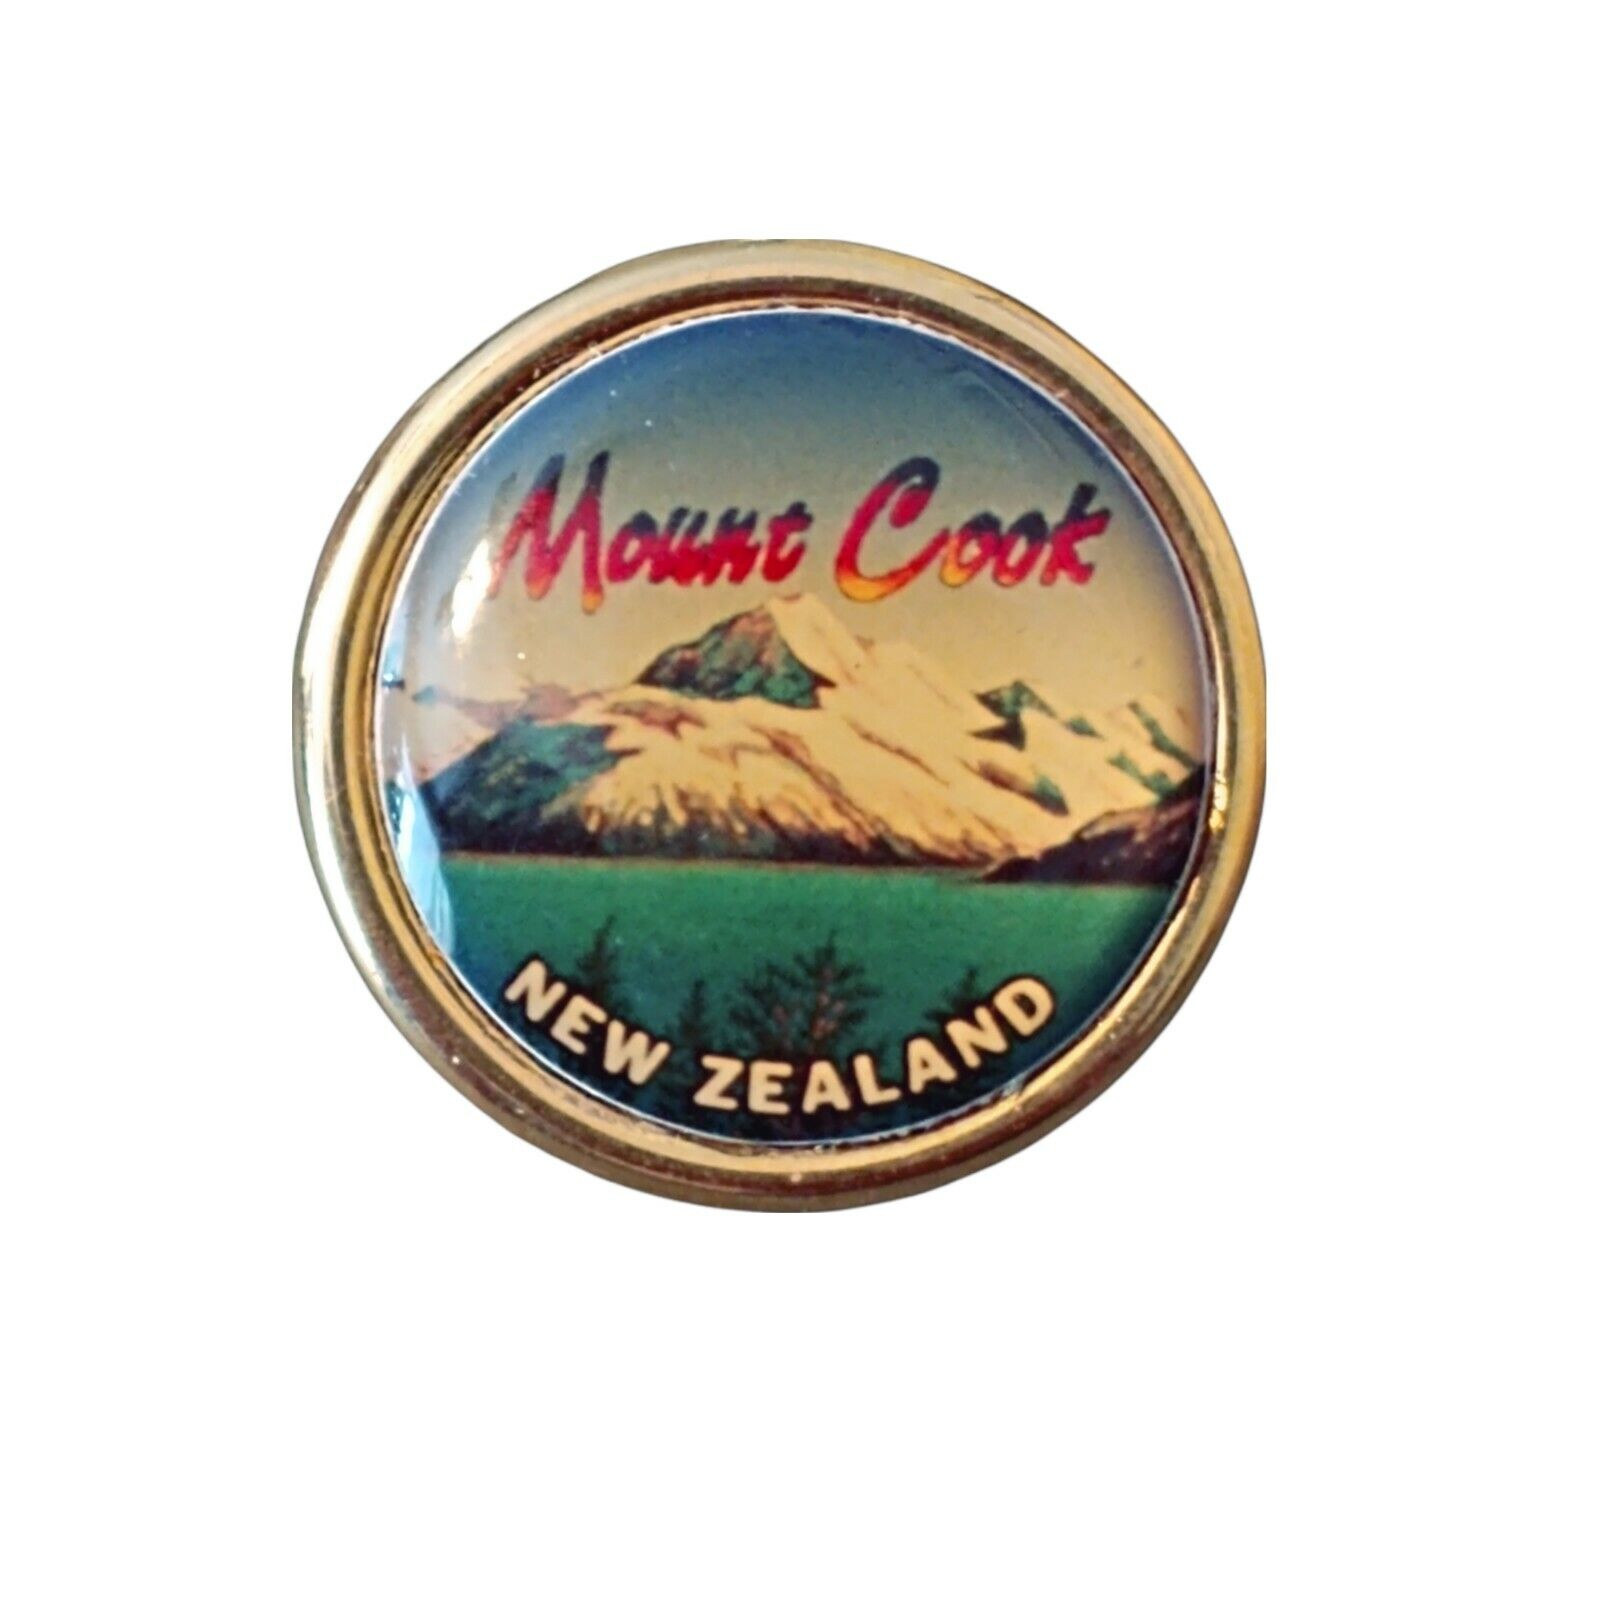 MOUNT COOK NEW ZEALAND Travel Pin - Round